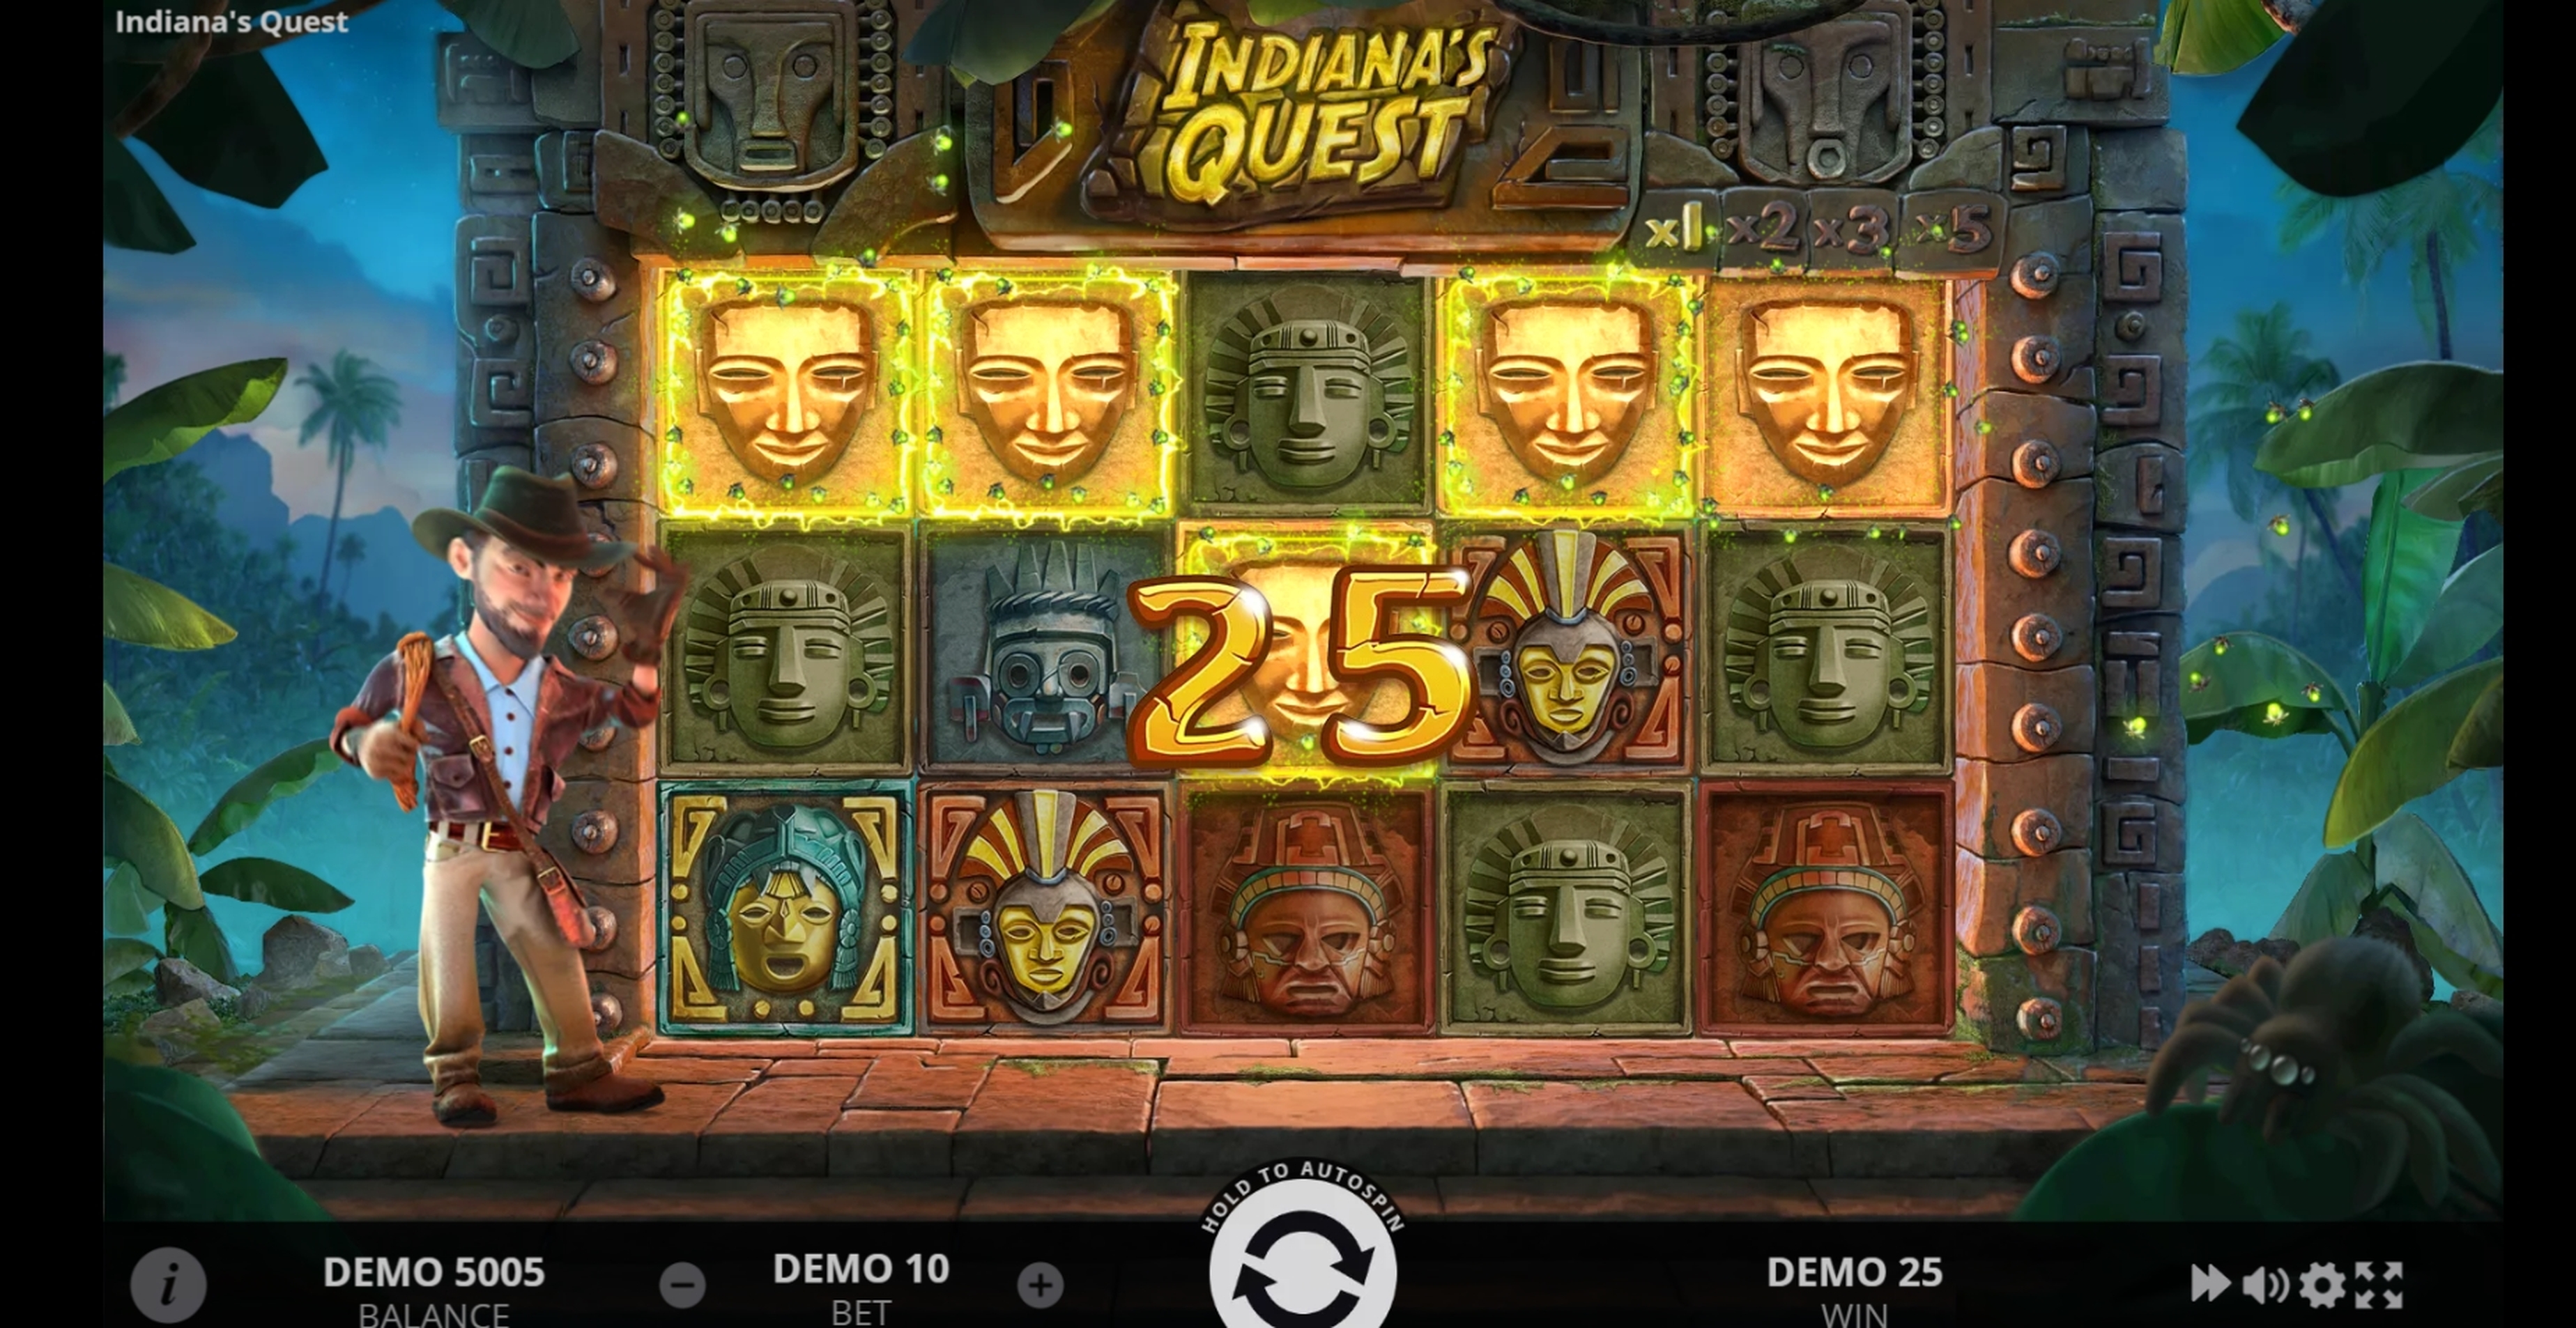 Win Money in Indiana's Quest Free Slot Game by Evoplay Entertainment